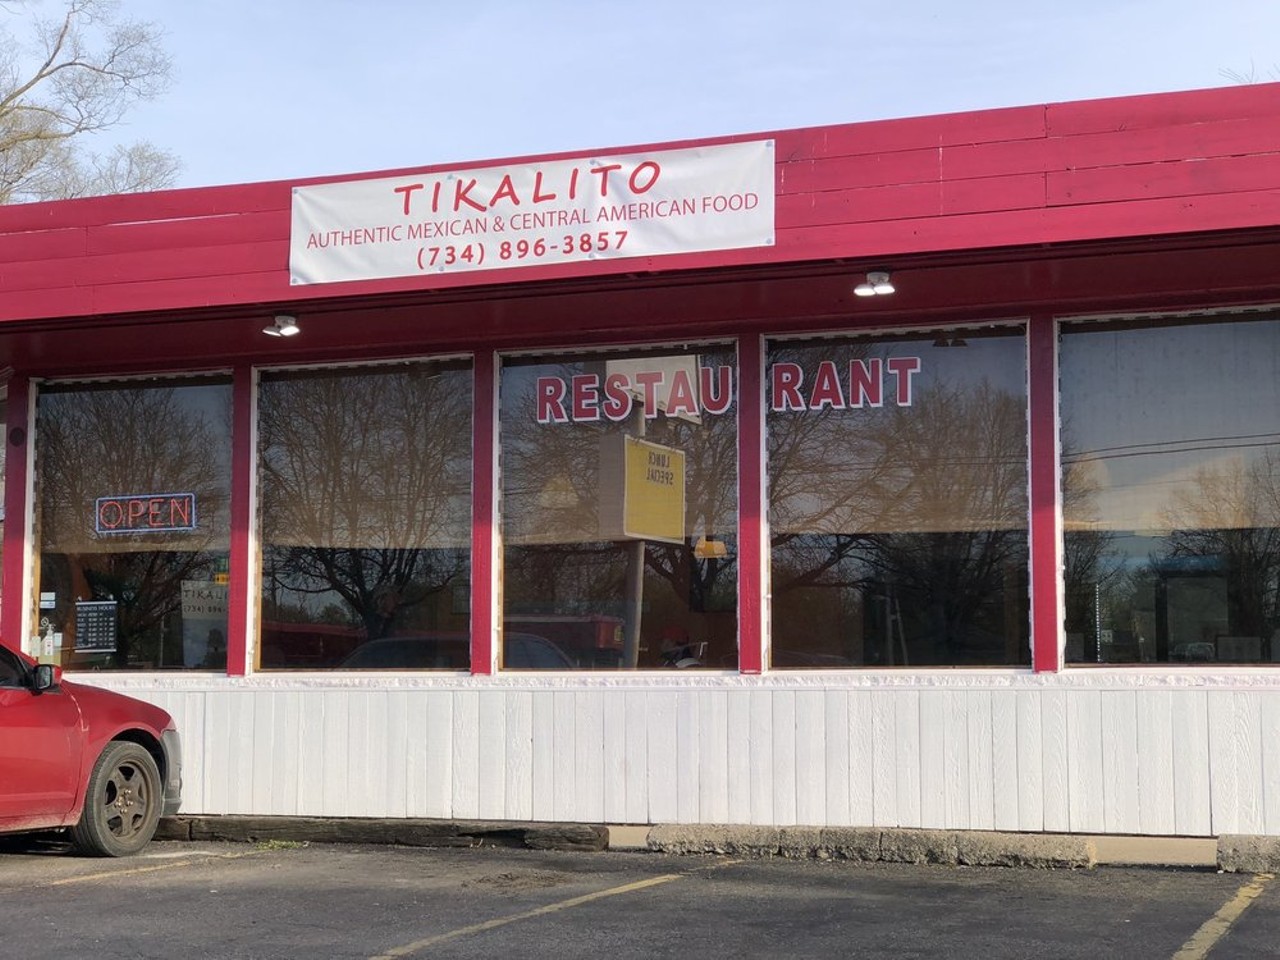 Tikalito
1346 E. Michigan Ave., Ypsilanti; 734-896-3857
This newly opened authentic Mexican restaurant has taken over the spot previously occupied by HANA Korean, bringing fresh flavors to the table.